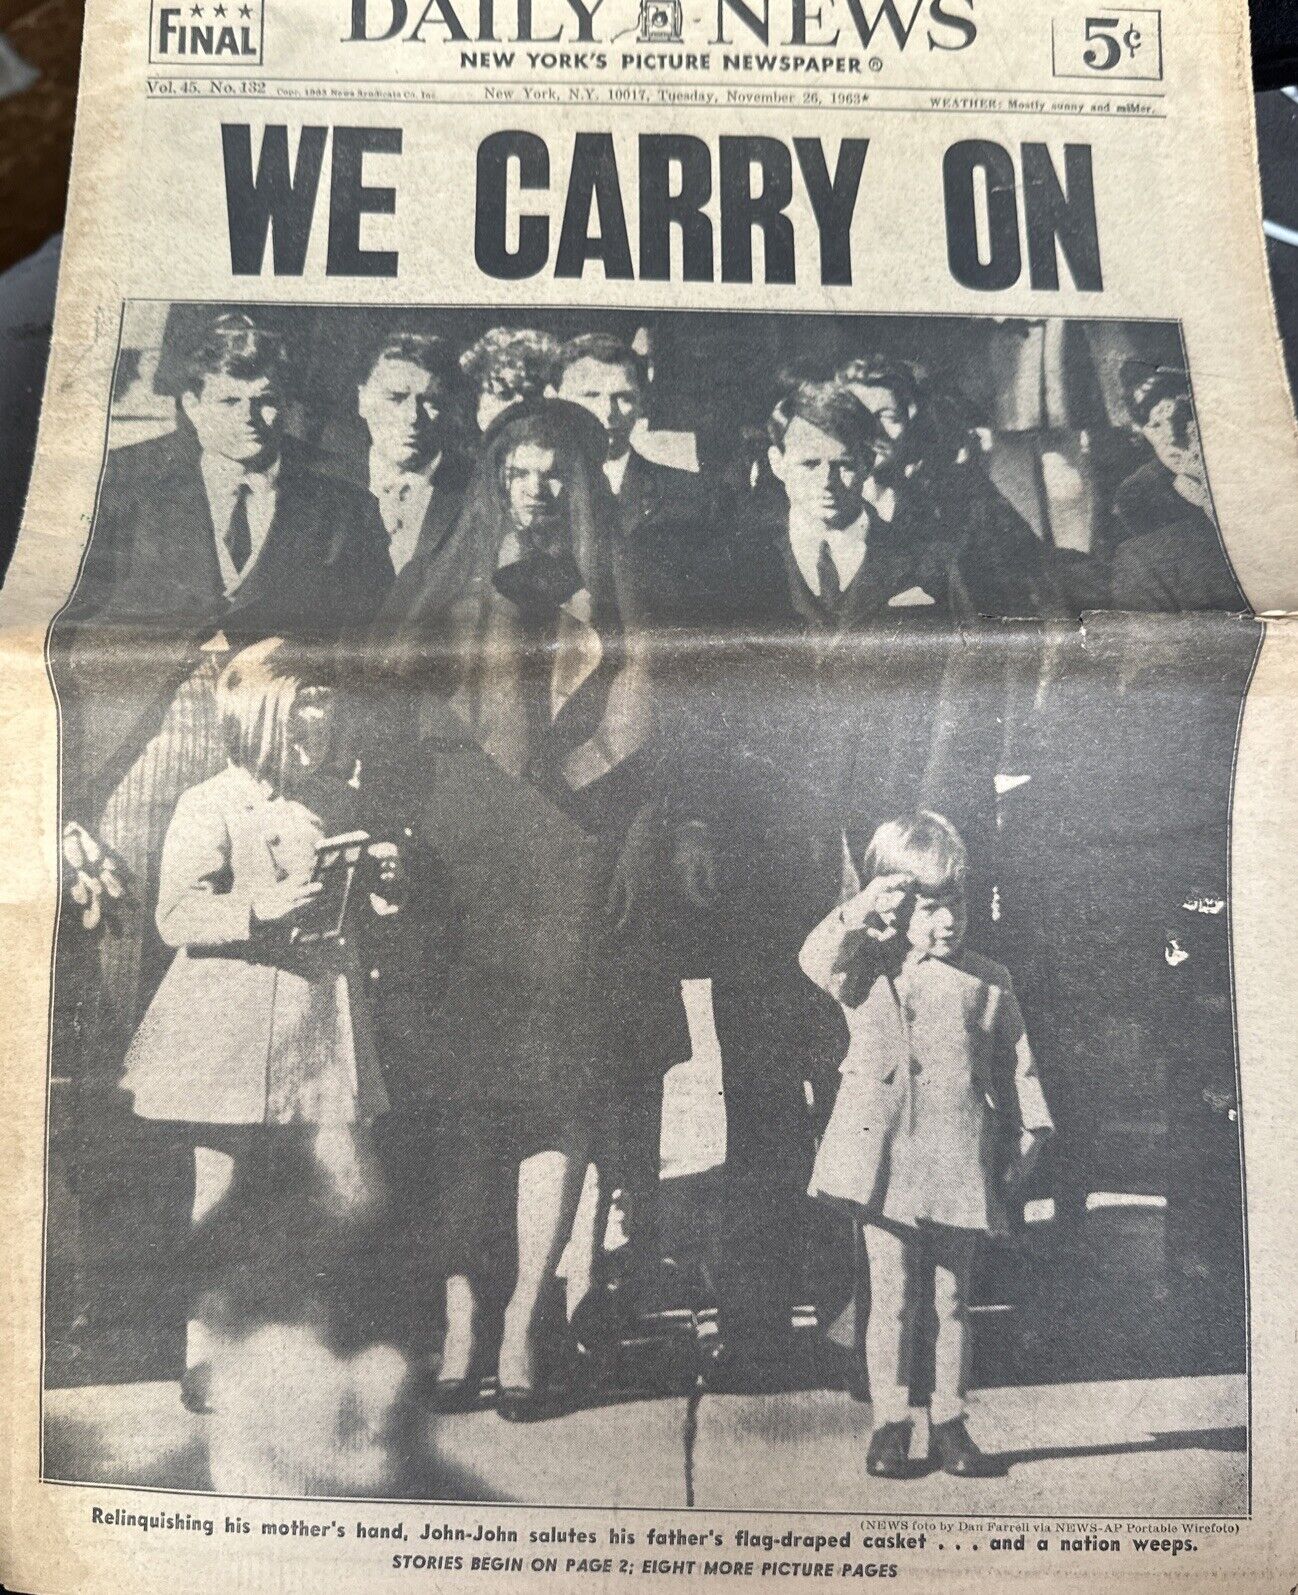 New York Picture Newspaper We Carry On November 26 1963 JFK Vol 45 No 132